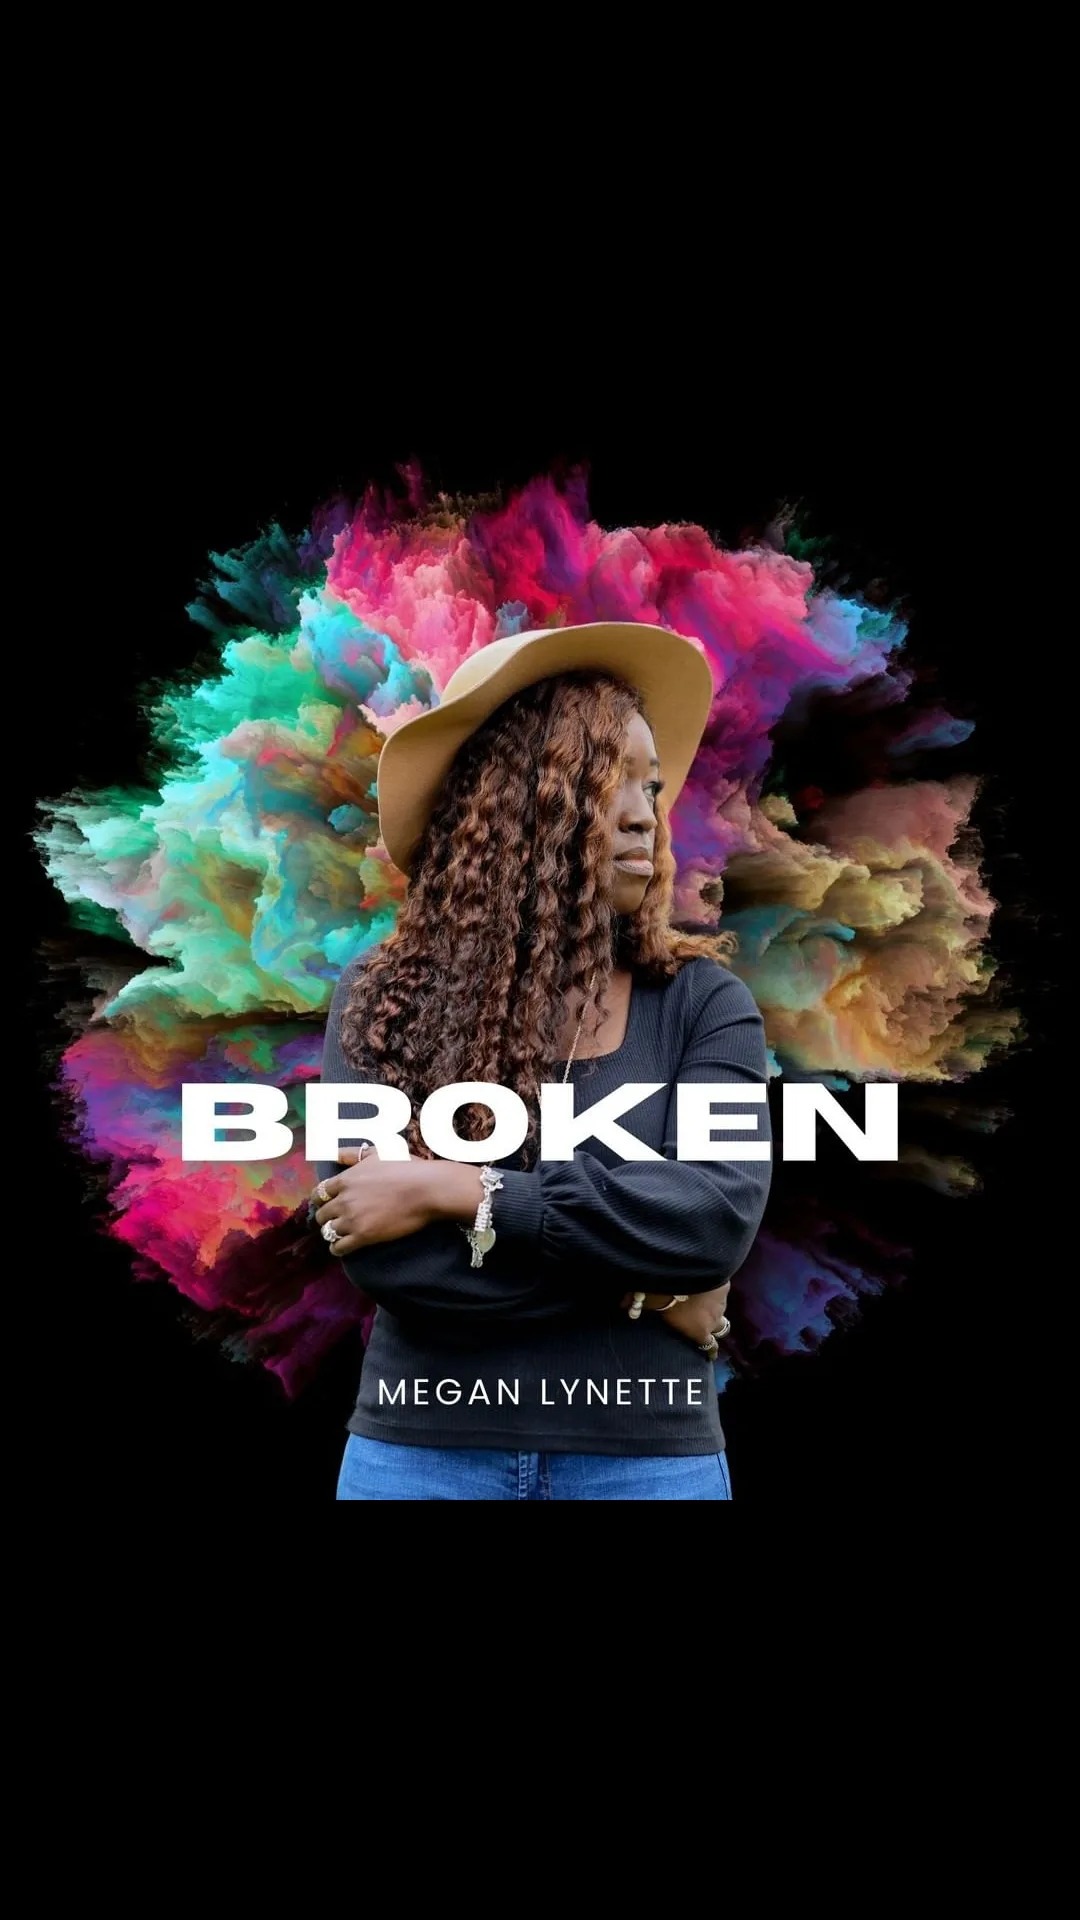 Depicting a New Level of Authenticity and Vulnerability - Megan Lynette Unveils Evocative New Single, ‘Broken’